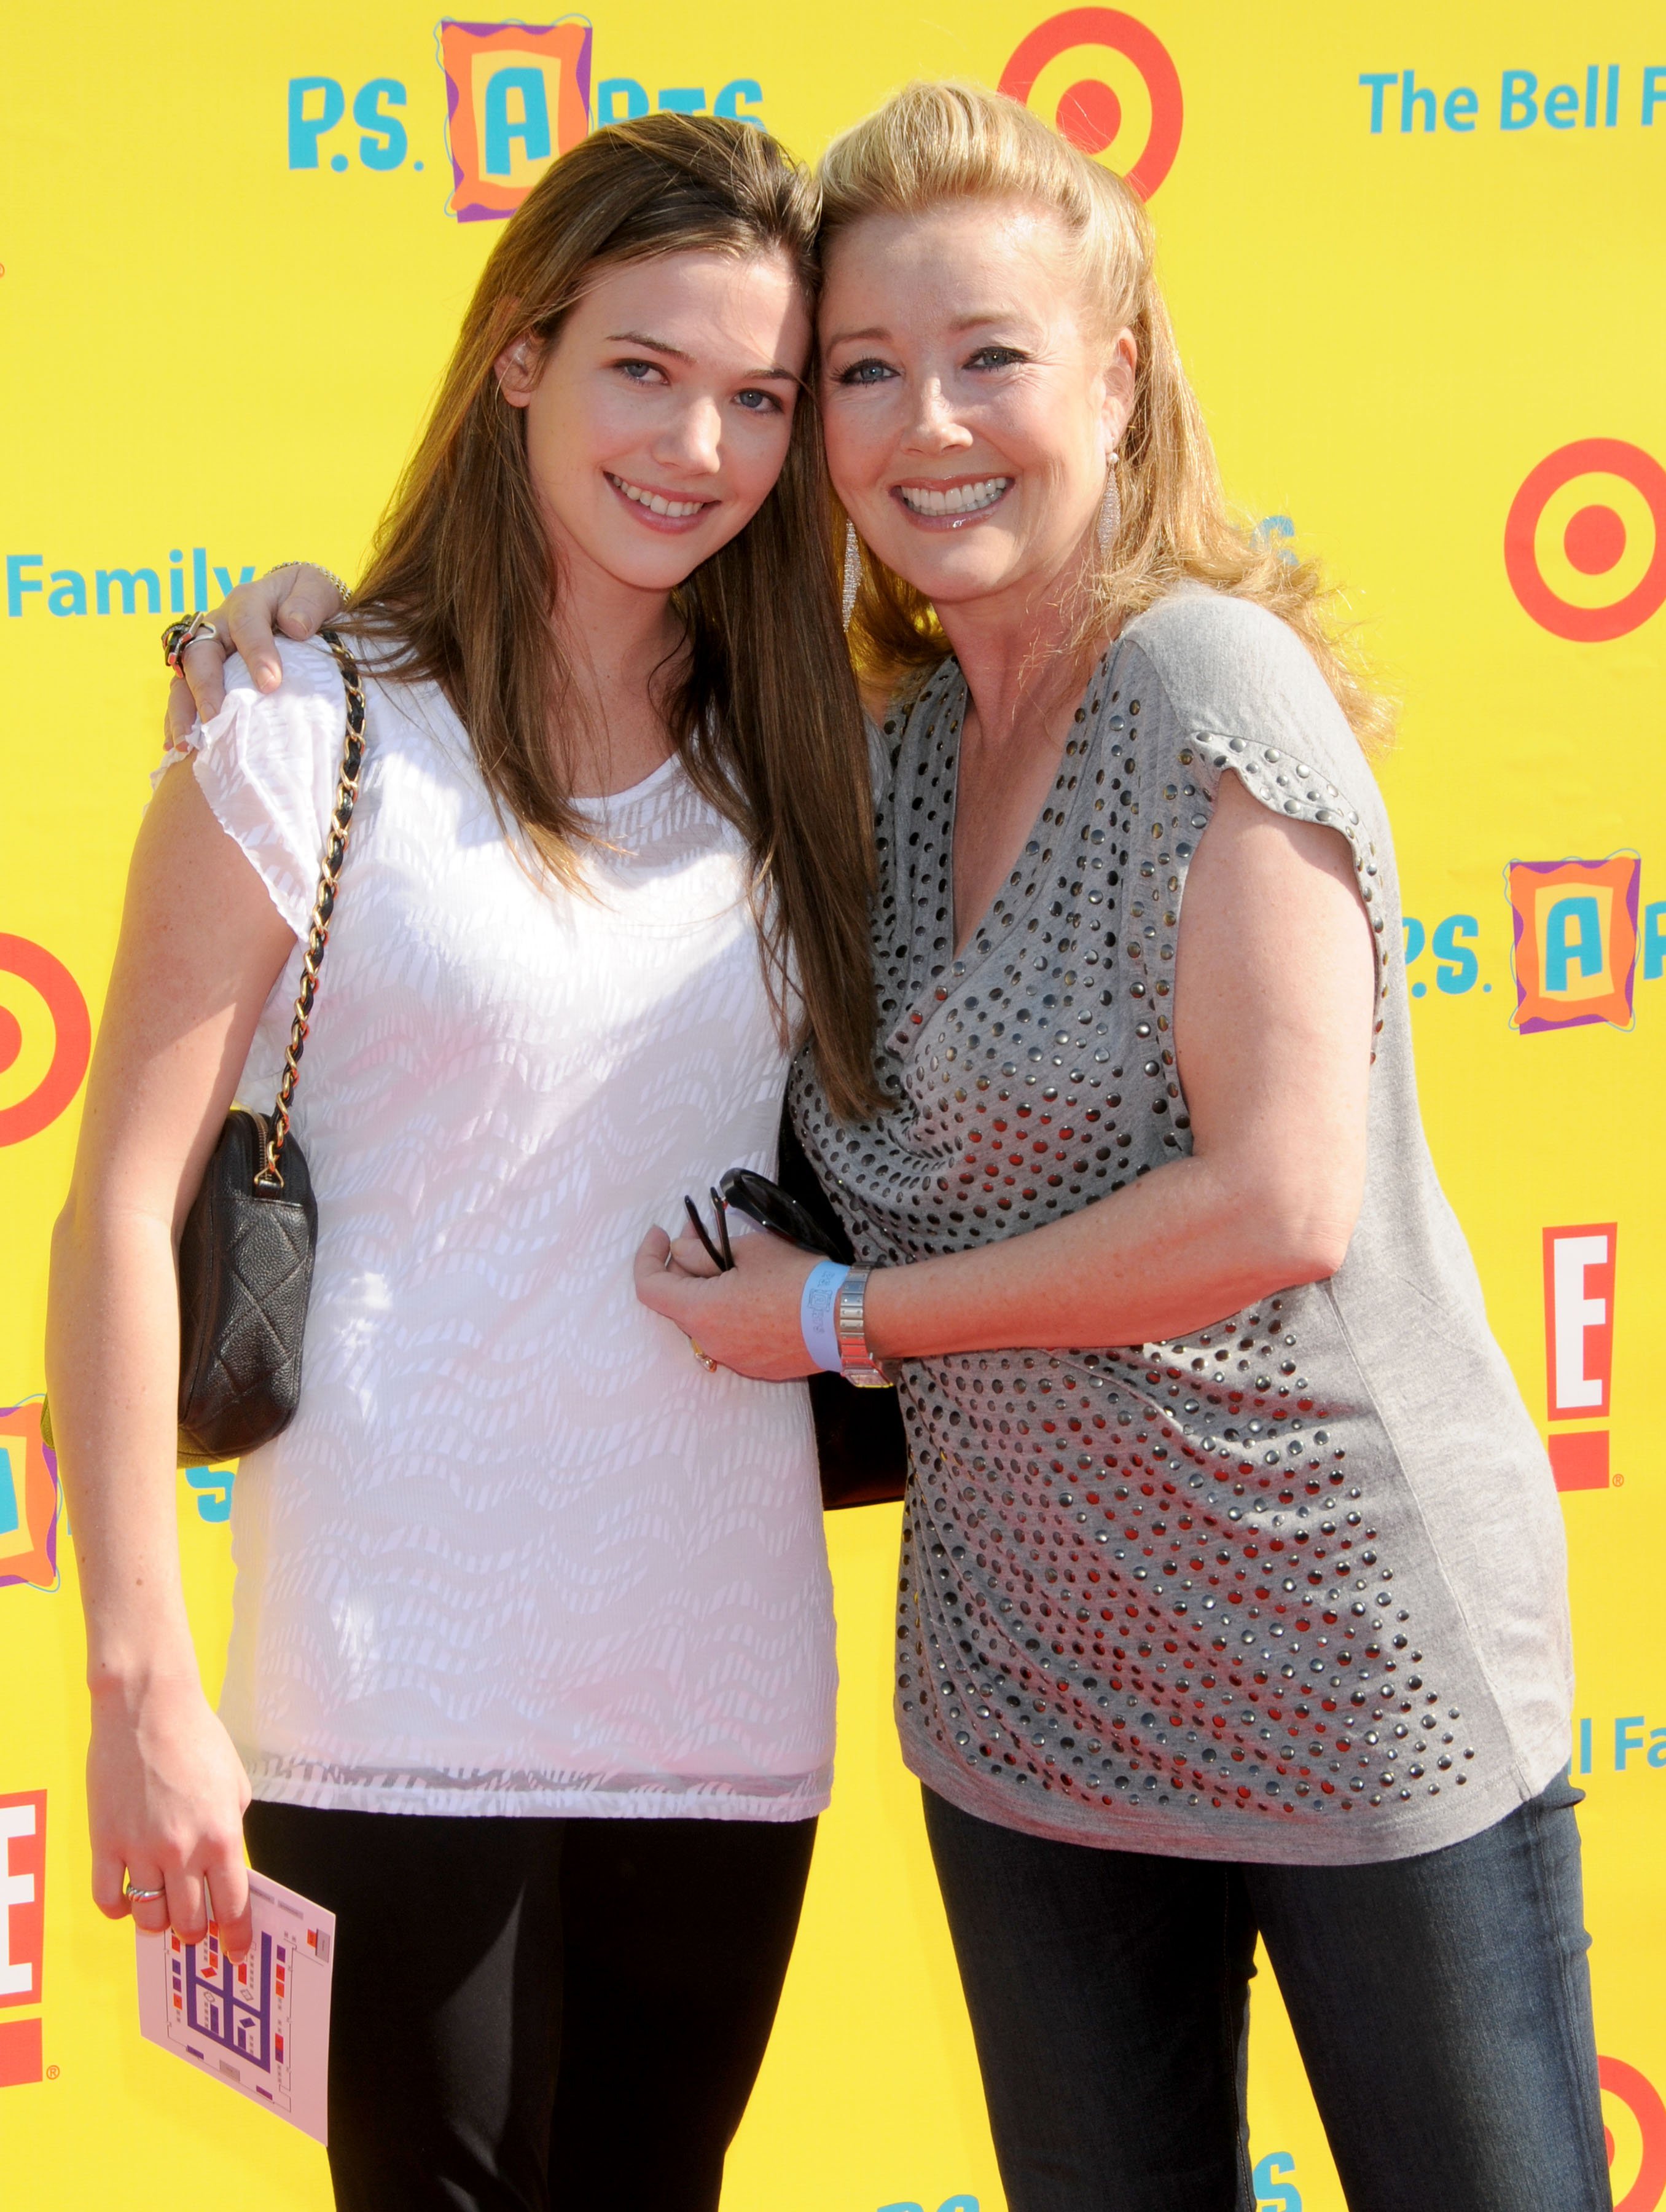 Melody Thomas Scott and their daughter at the Creative Arts Fair Supporting P.S. Arts on November 7, 2010, in Santa Monica, California. | Source: Gregg DeGuire/FilmMagic/Getty Images